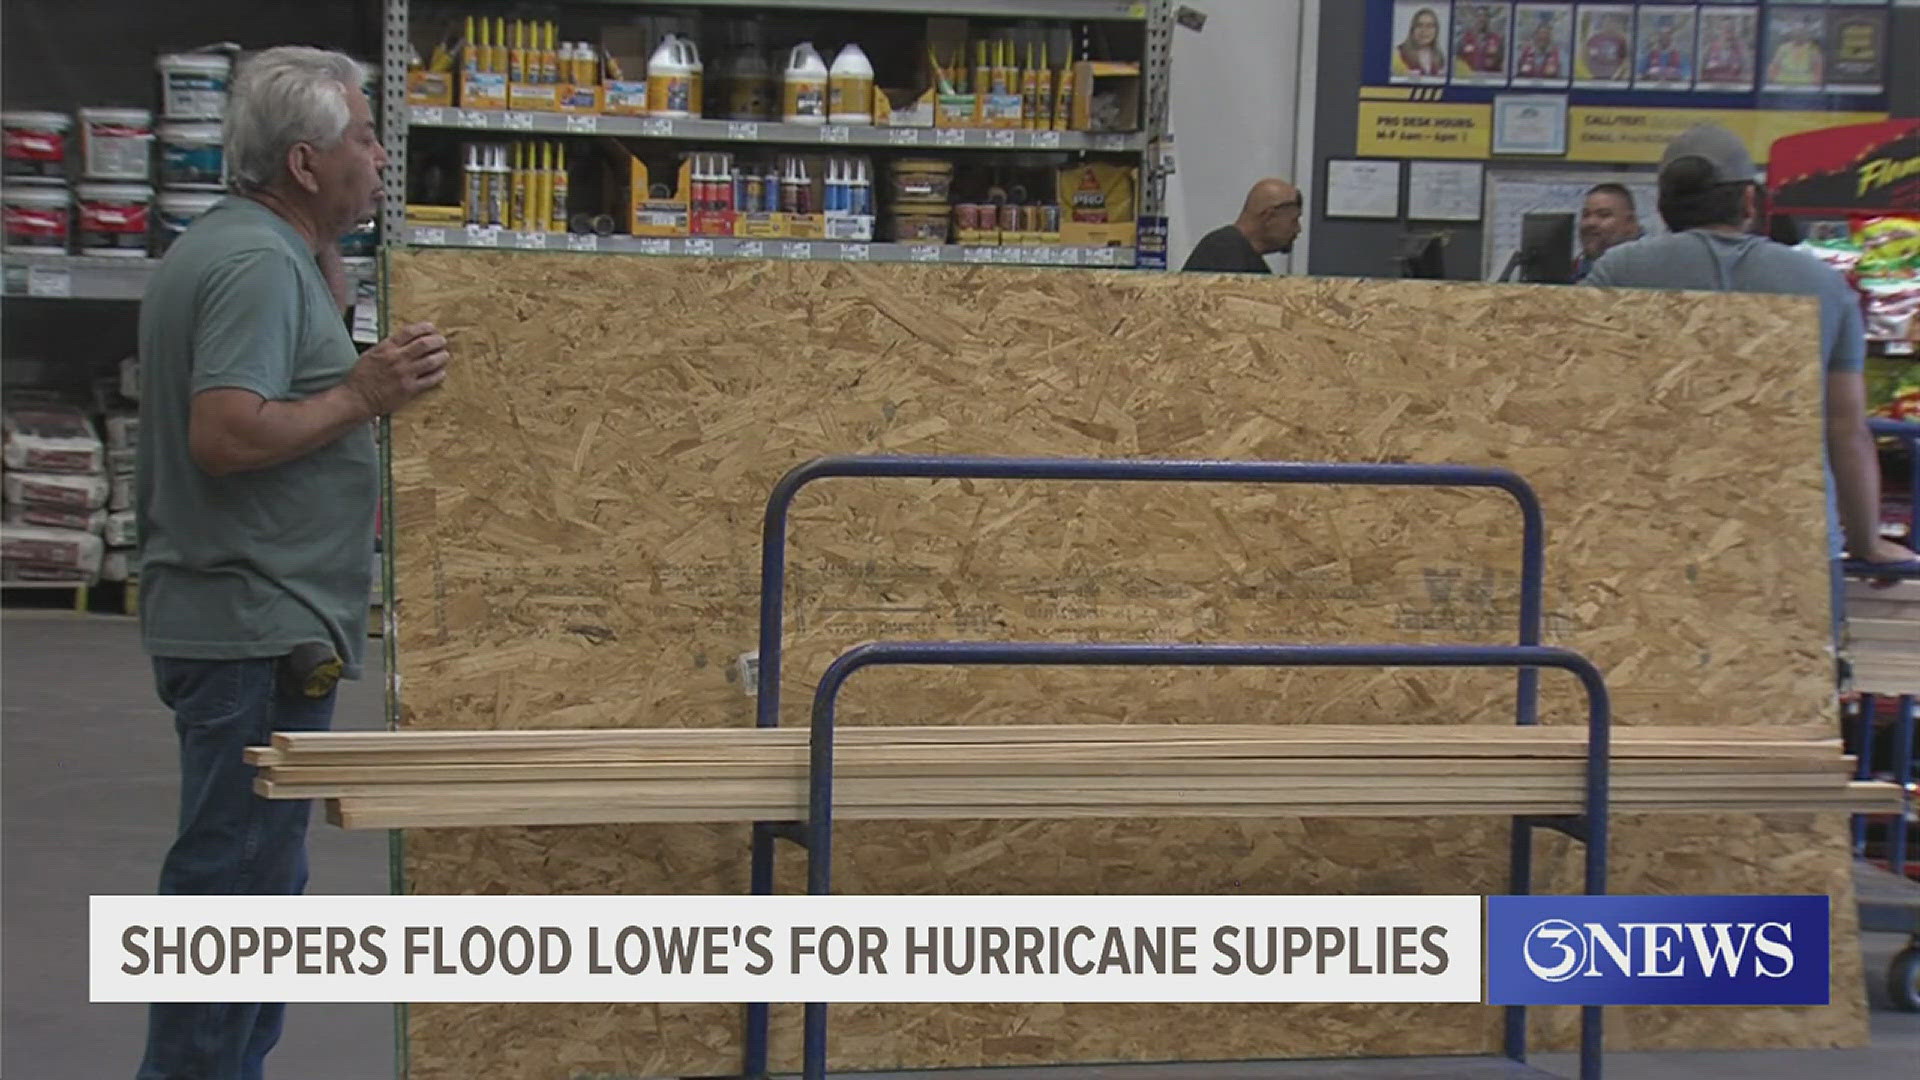 Officials recommend doing a brief check list of what supplies you do have to ensure it is accounted for and working before going to purchase supplies.